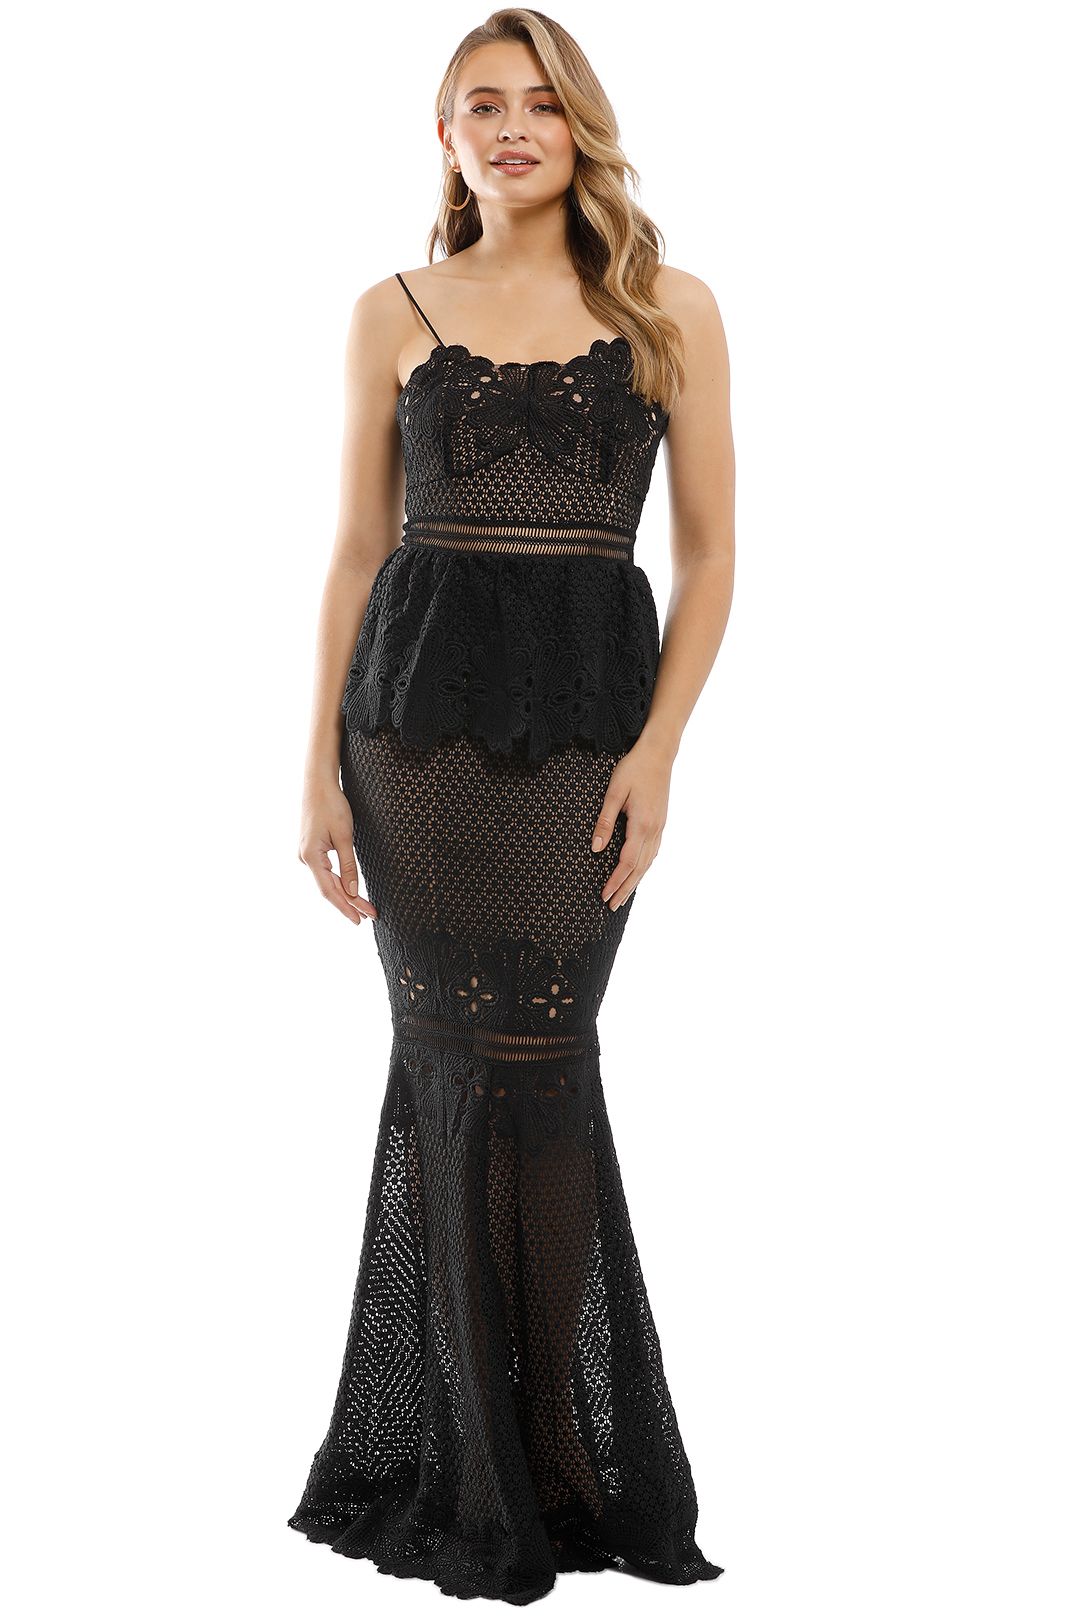 Grace and Hart - Frilling Around Gown - Black - Front